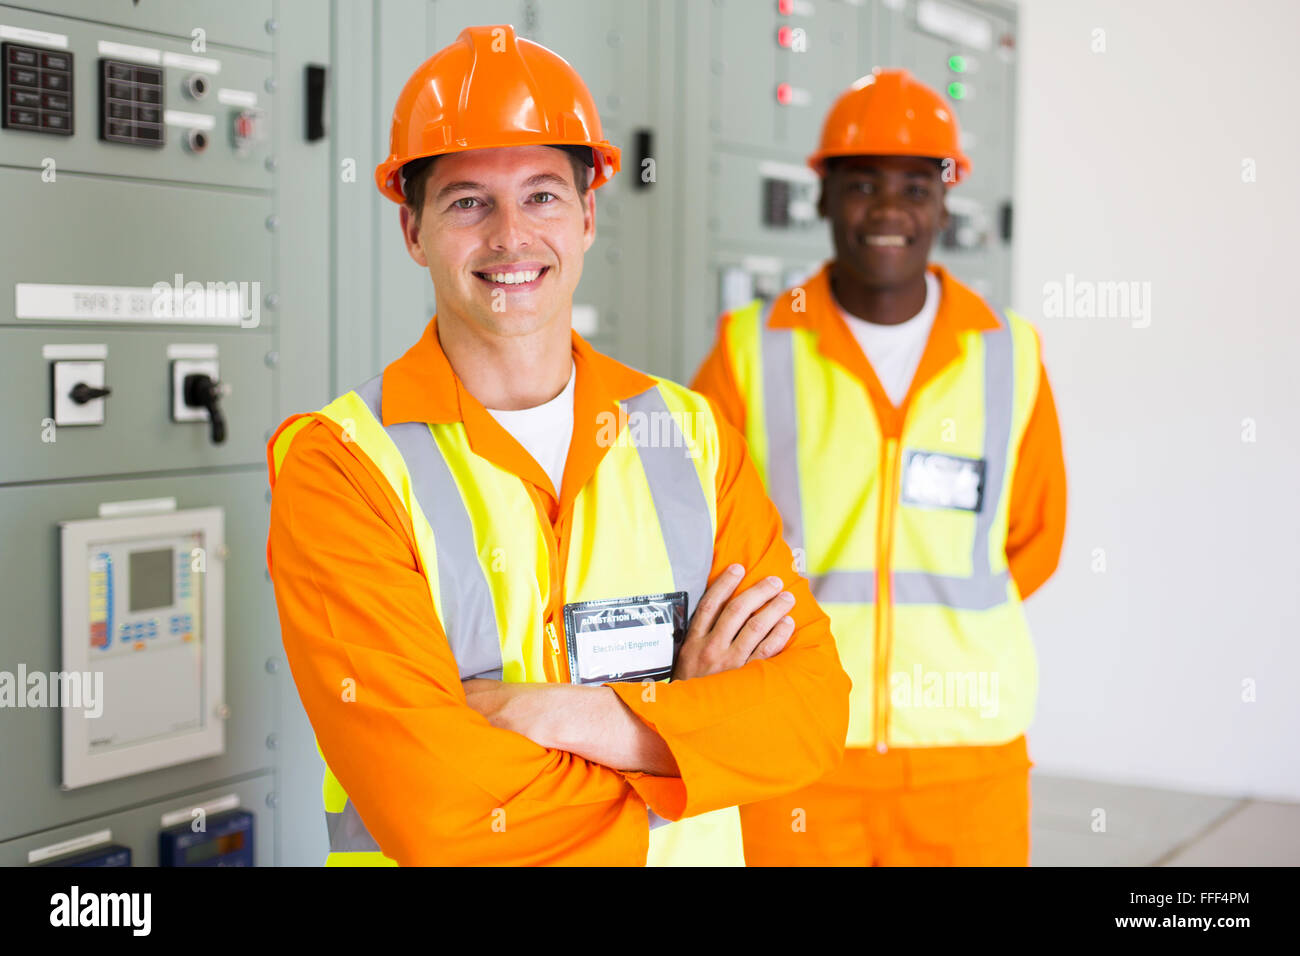 professional industrial electrician with colleague on background Stock Photo